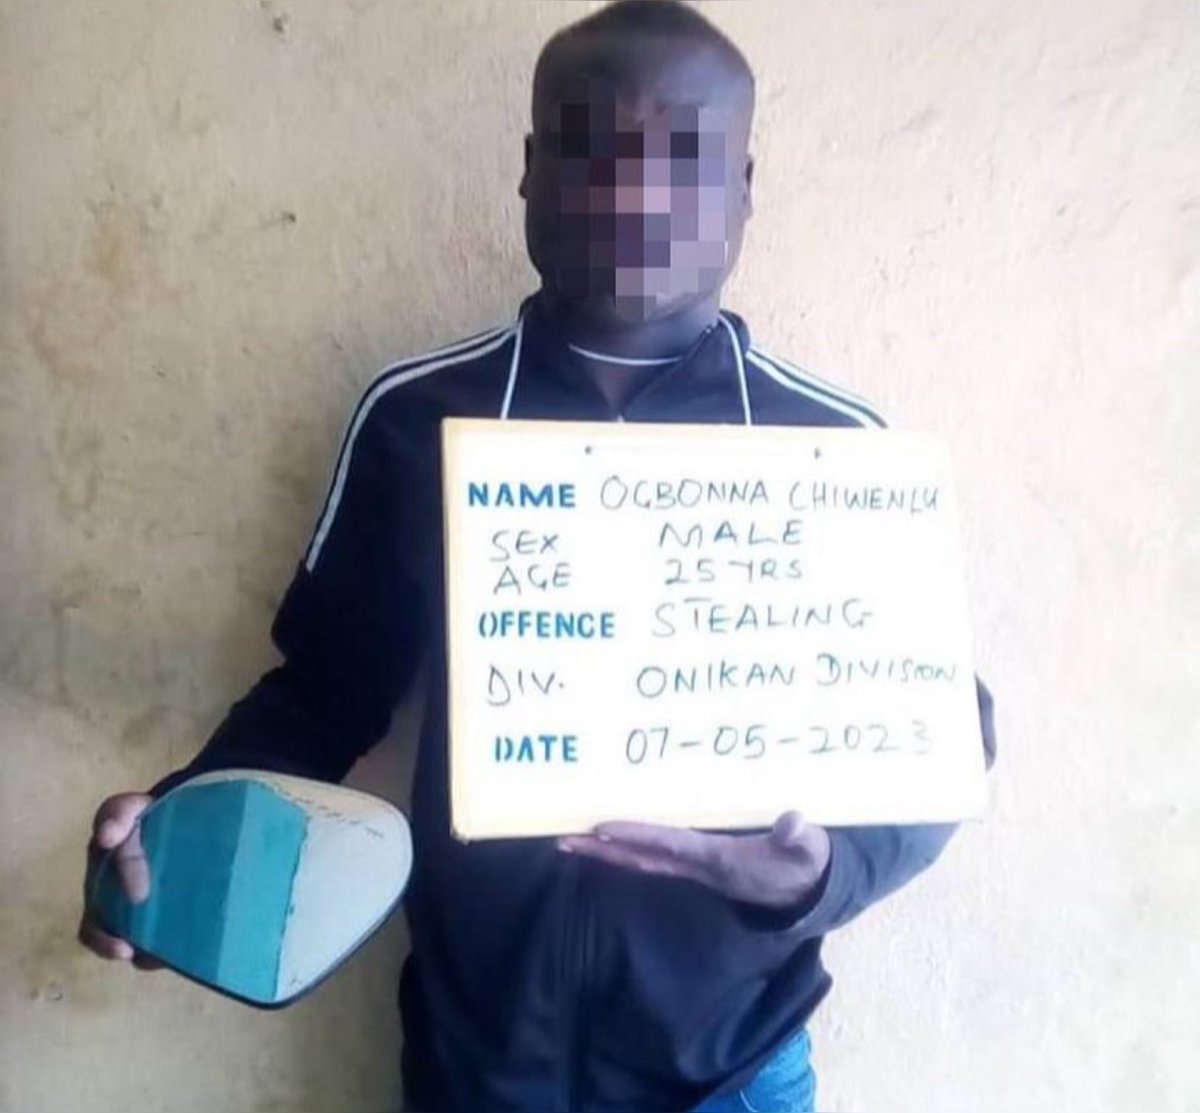 Criminal who poses as delivery man to steal car side-mirrors apprehended in Lagos.

#makesensepromotions